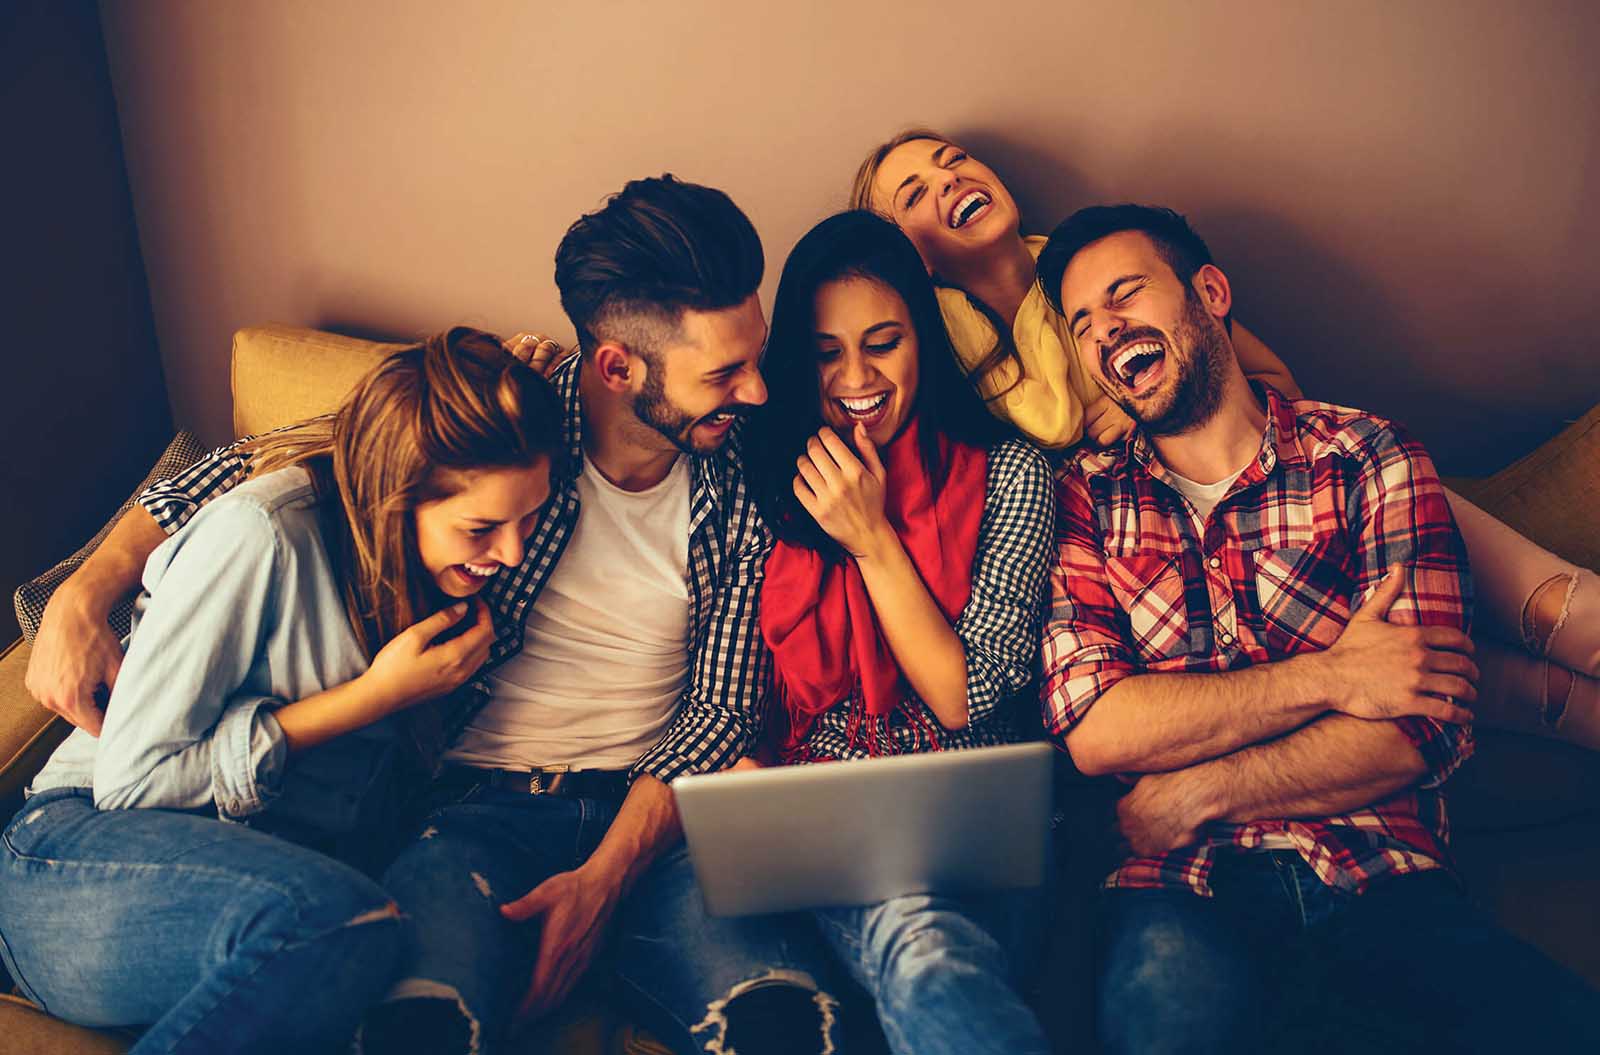 Hulu and Disney collaborated on a new study to see what kind of binge watchers there are. What type of streamer do you fit with?